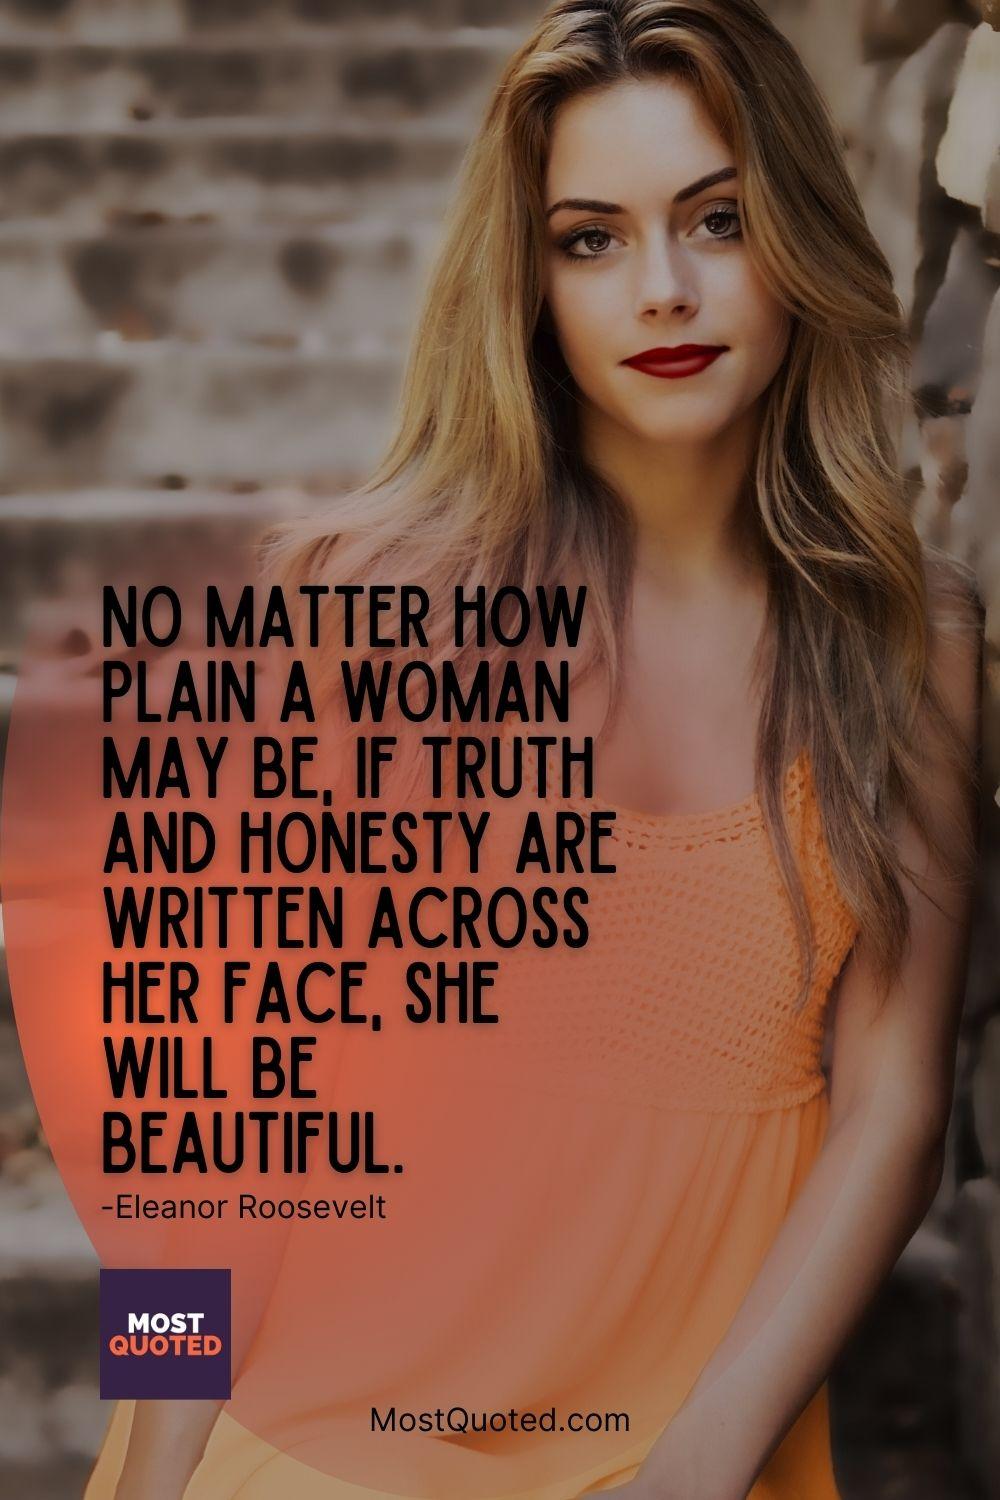 No matter how plain a woman may be, if truth and honesty are written across her face, she will be beautiful. - Eleanor Roosevelt